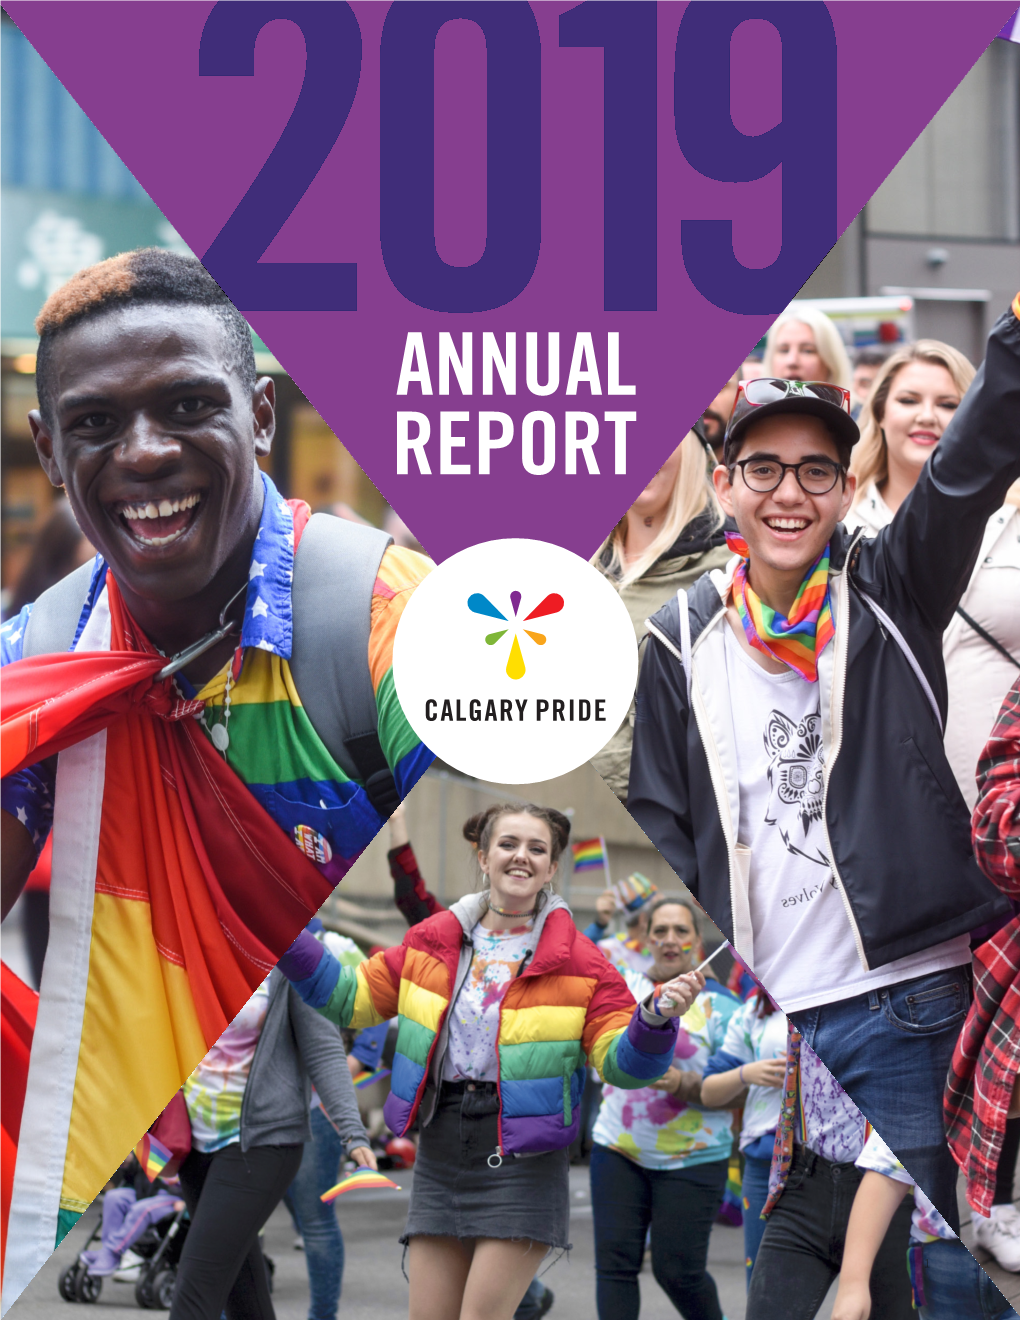 Download 2019 Annual Report